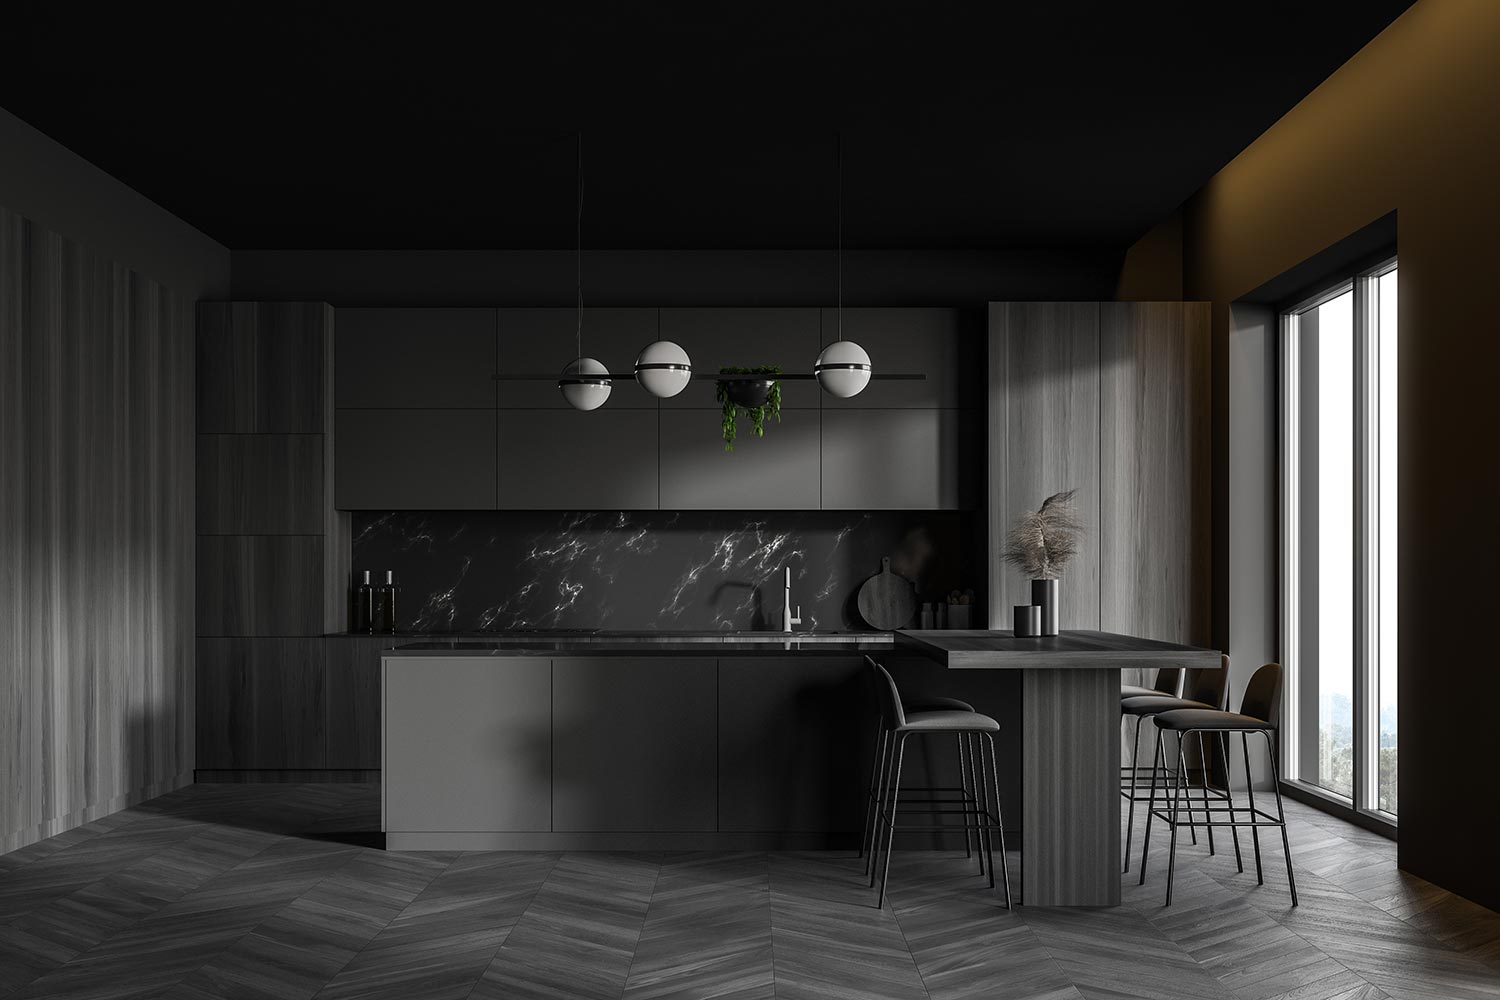 Interior of luxury kitchen with grey, black marble and wooden walls